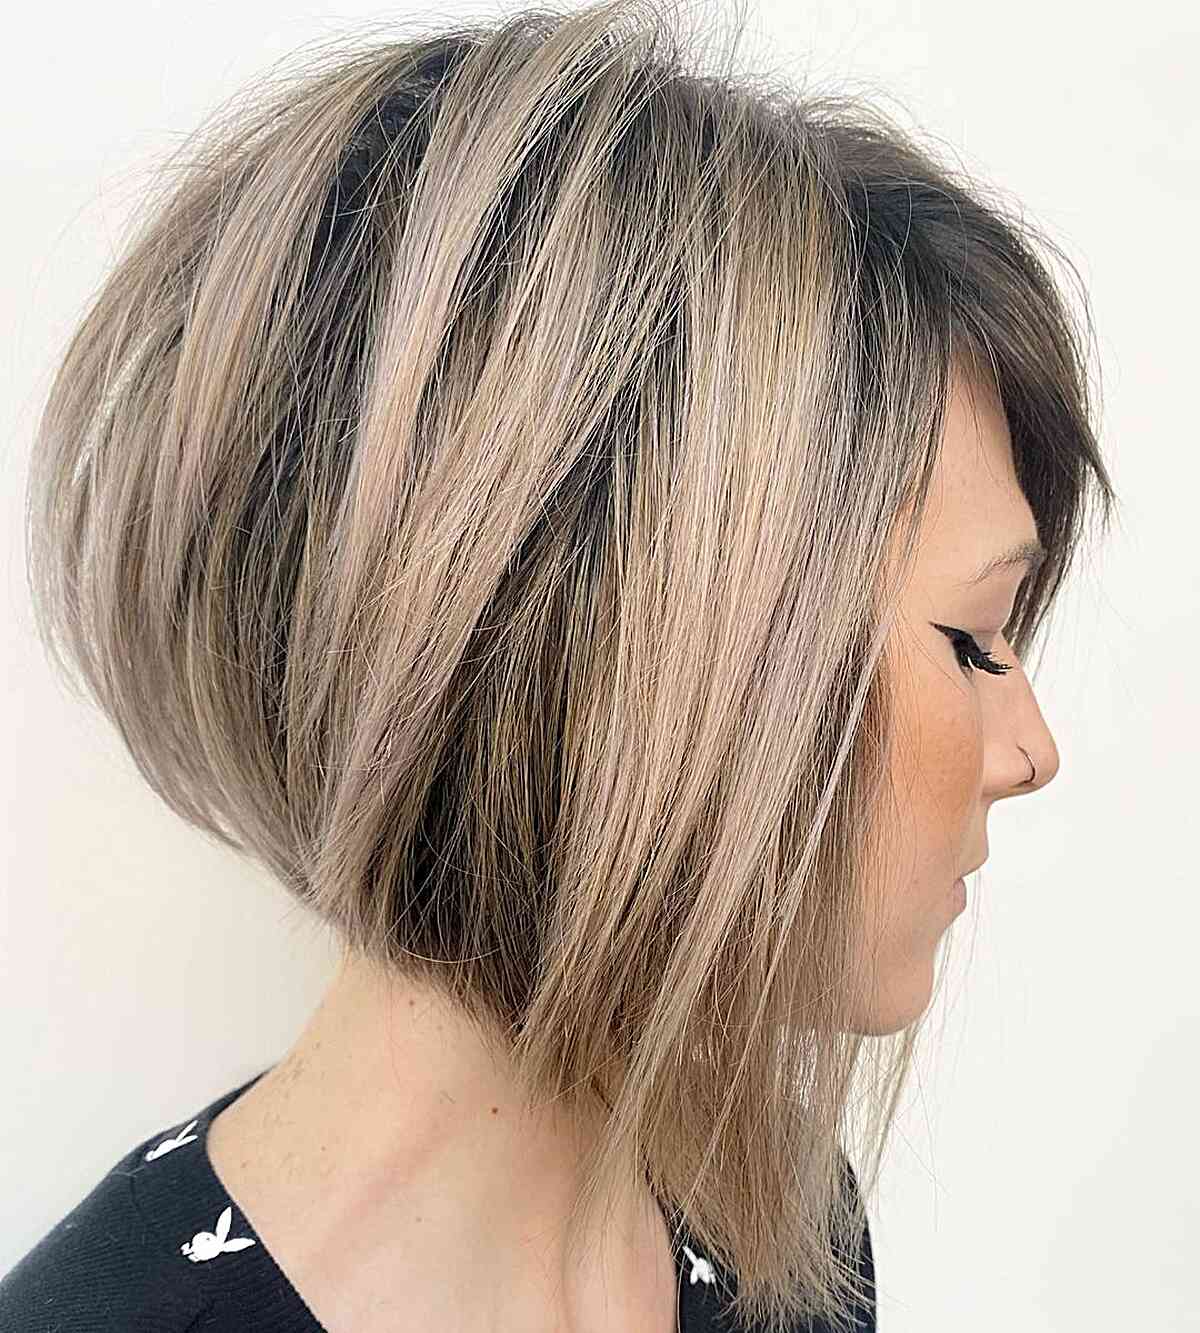 Messy Layered Stack Cut for Short Hair